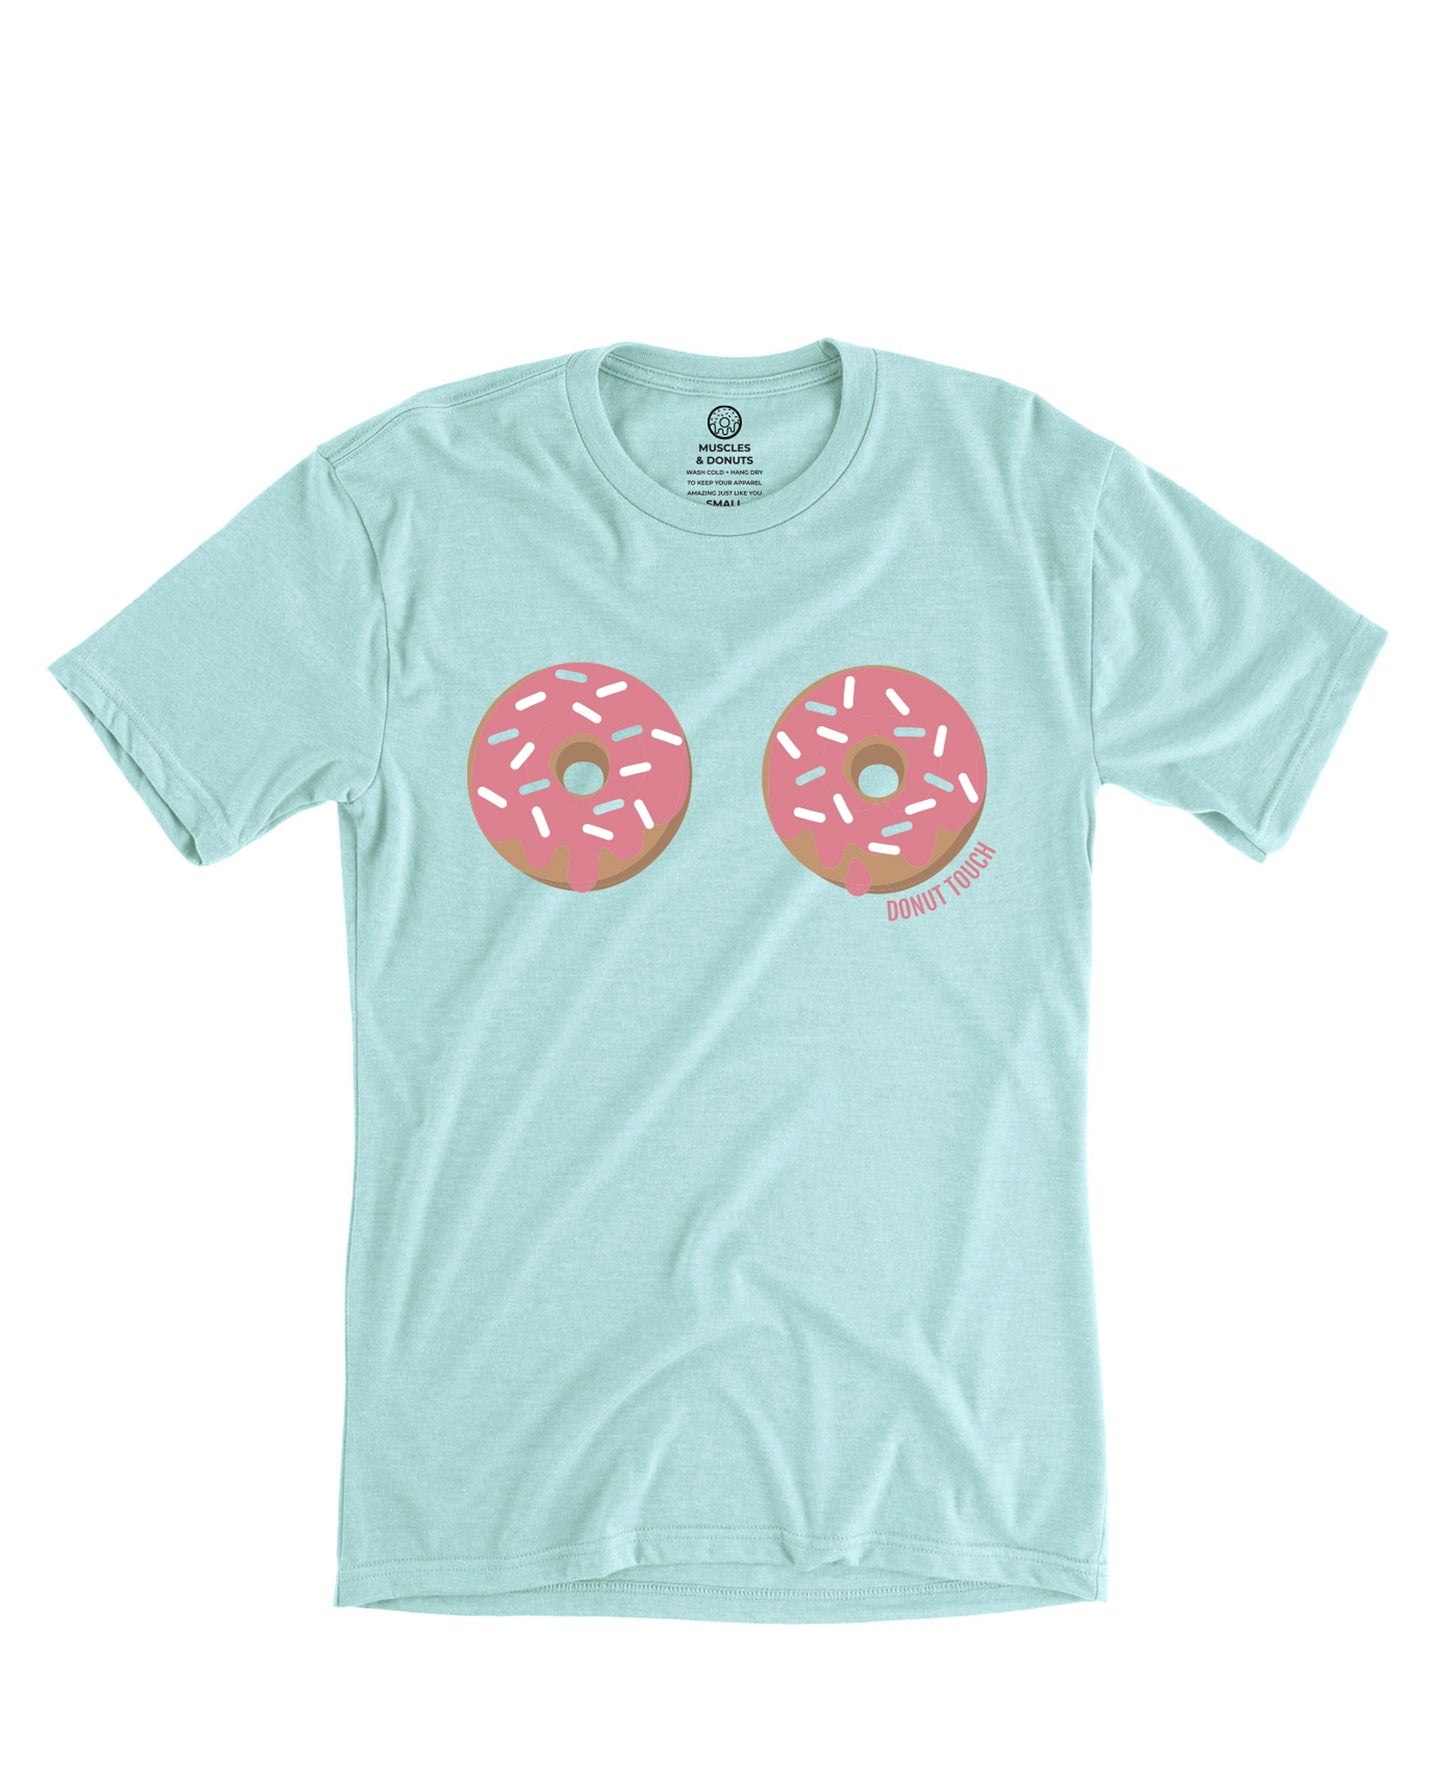 DONUT TOUCH! Dusty Blue Tee